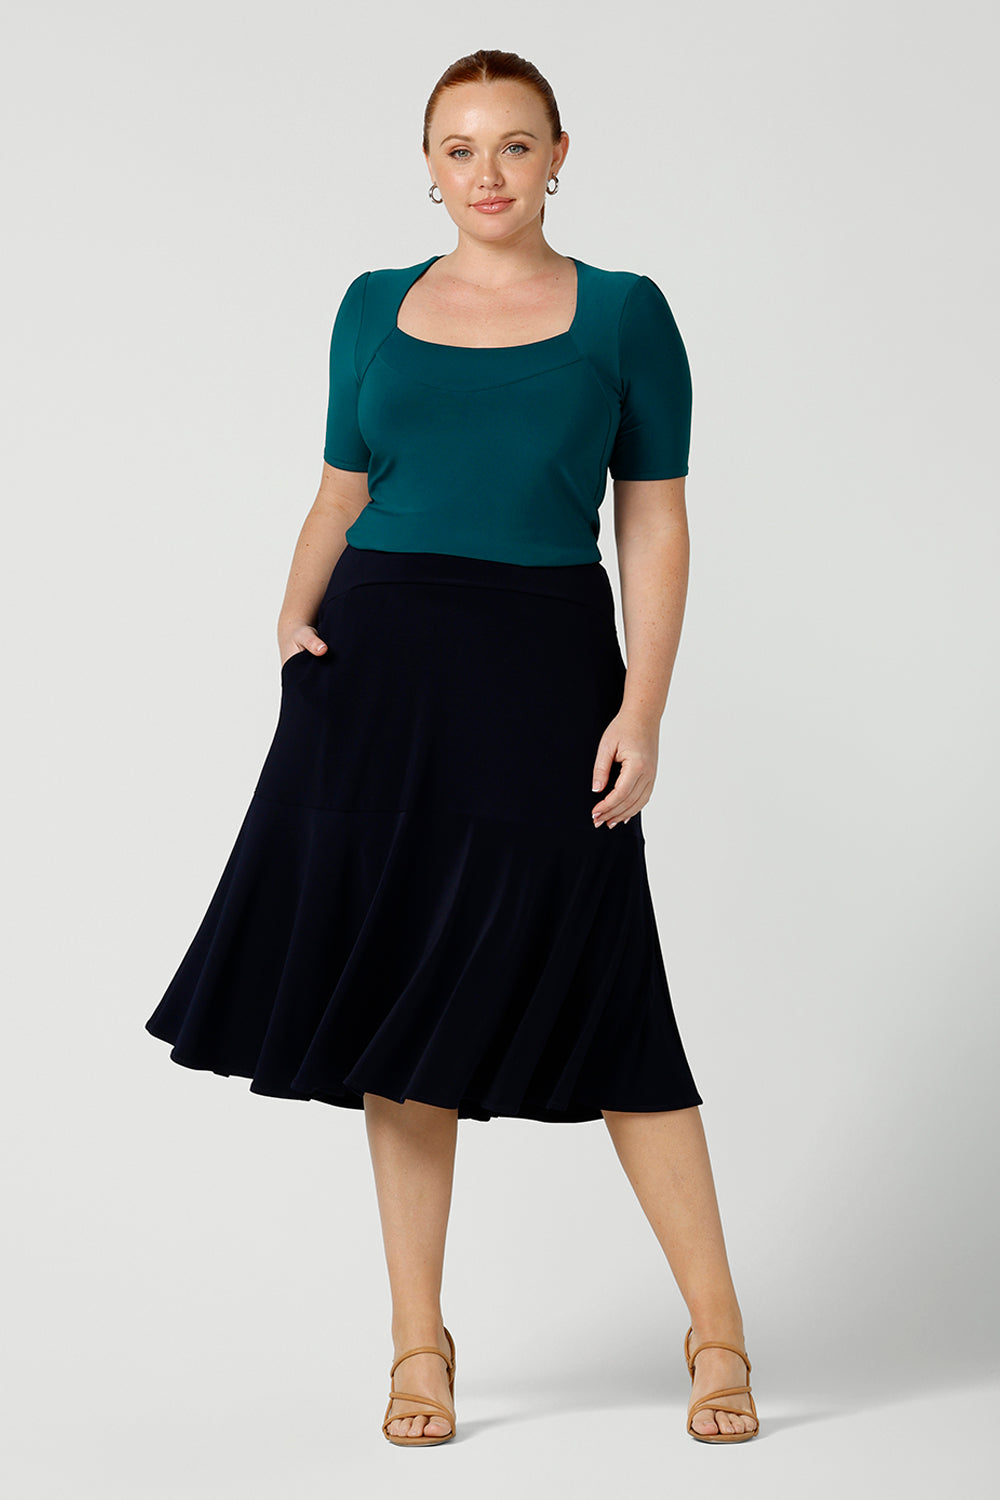 A great example of Australian-made skirts, this navy blue knee-length skirt in comfortable jersey fabric is worn with a fitted short sleeve top in teal. Available from Australian ladies clothing brand, Leina & Fleur, this classic navy skirt is available as petite to plus size office wear in their online boutique.